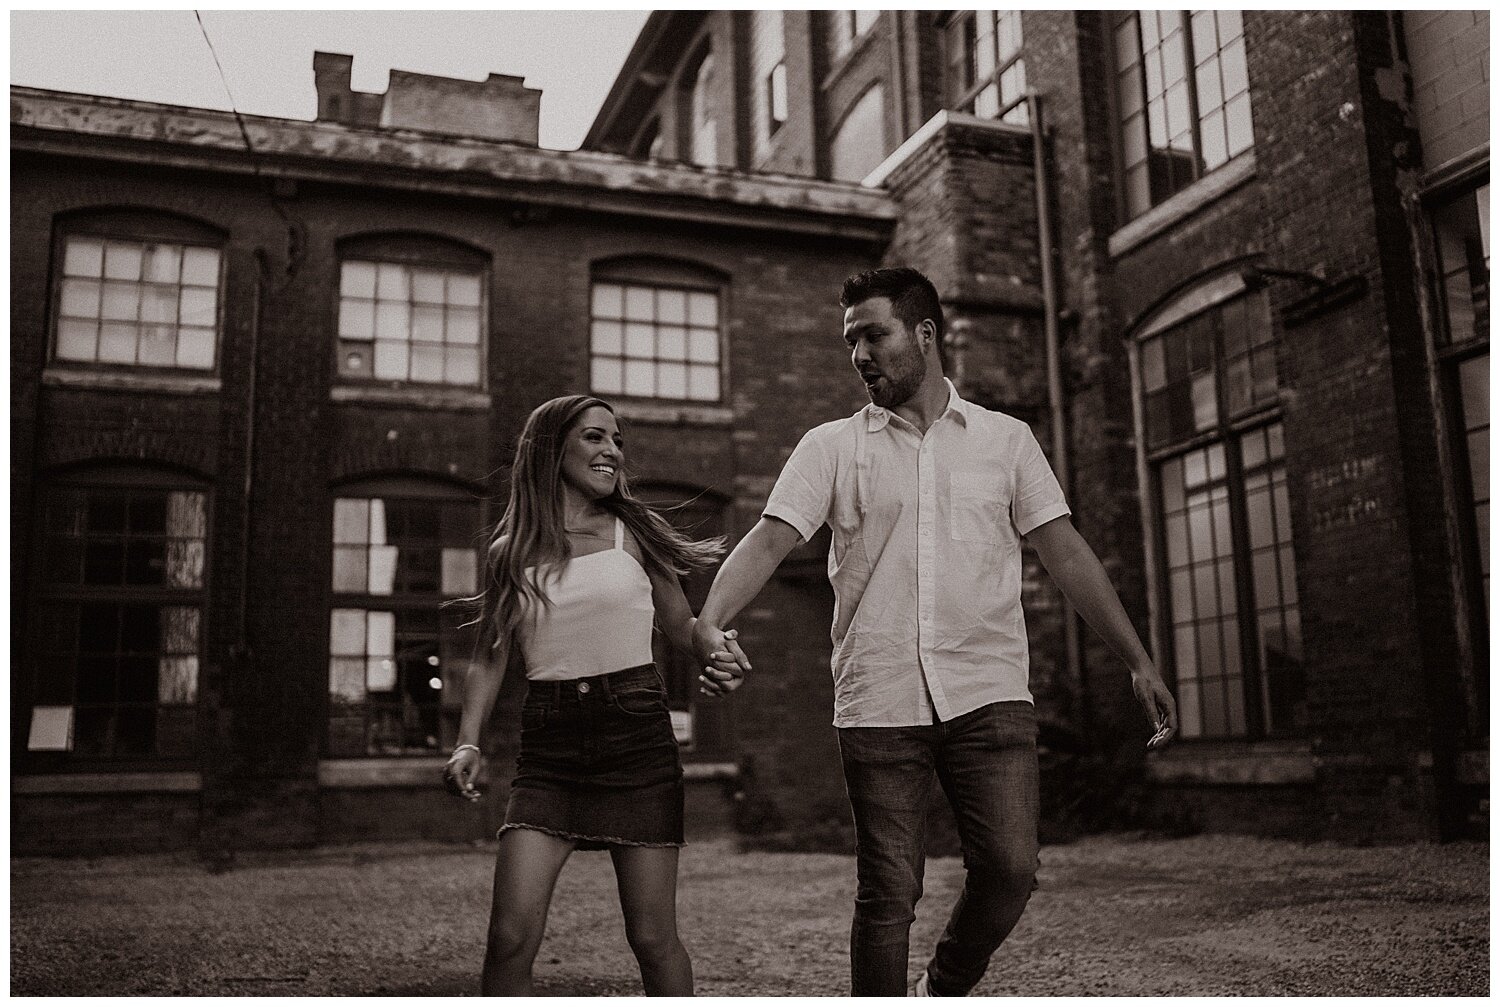 Cotton_Factory_And_Waterfall_Engagement_Session_Hamilton_Ontario_Wedding_Photographer_0067.jpg